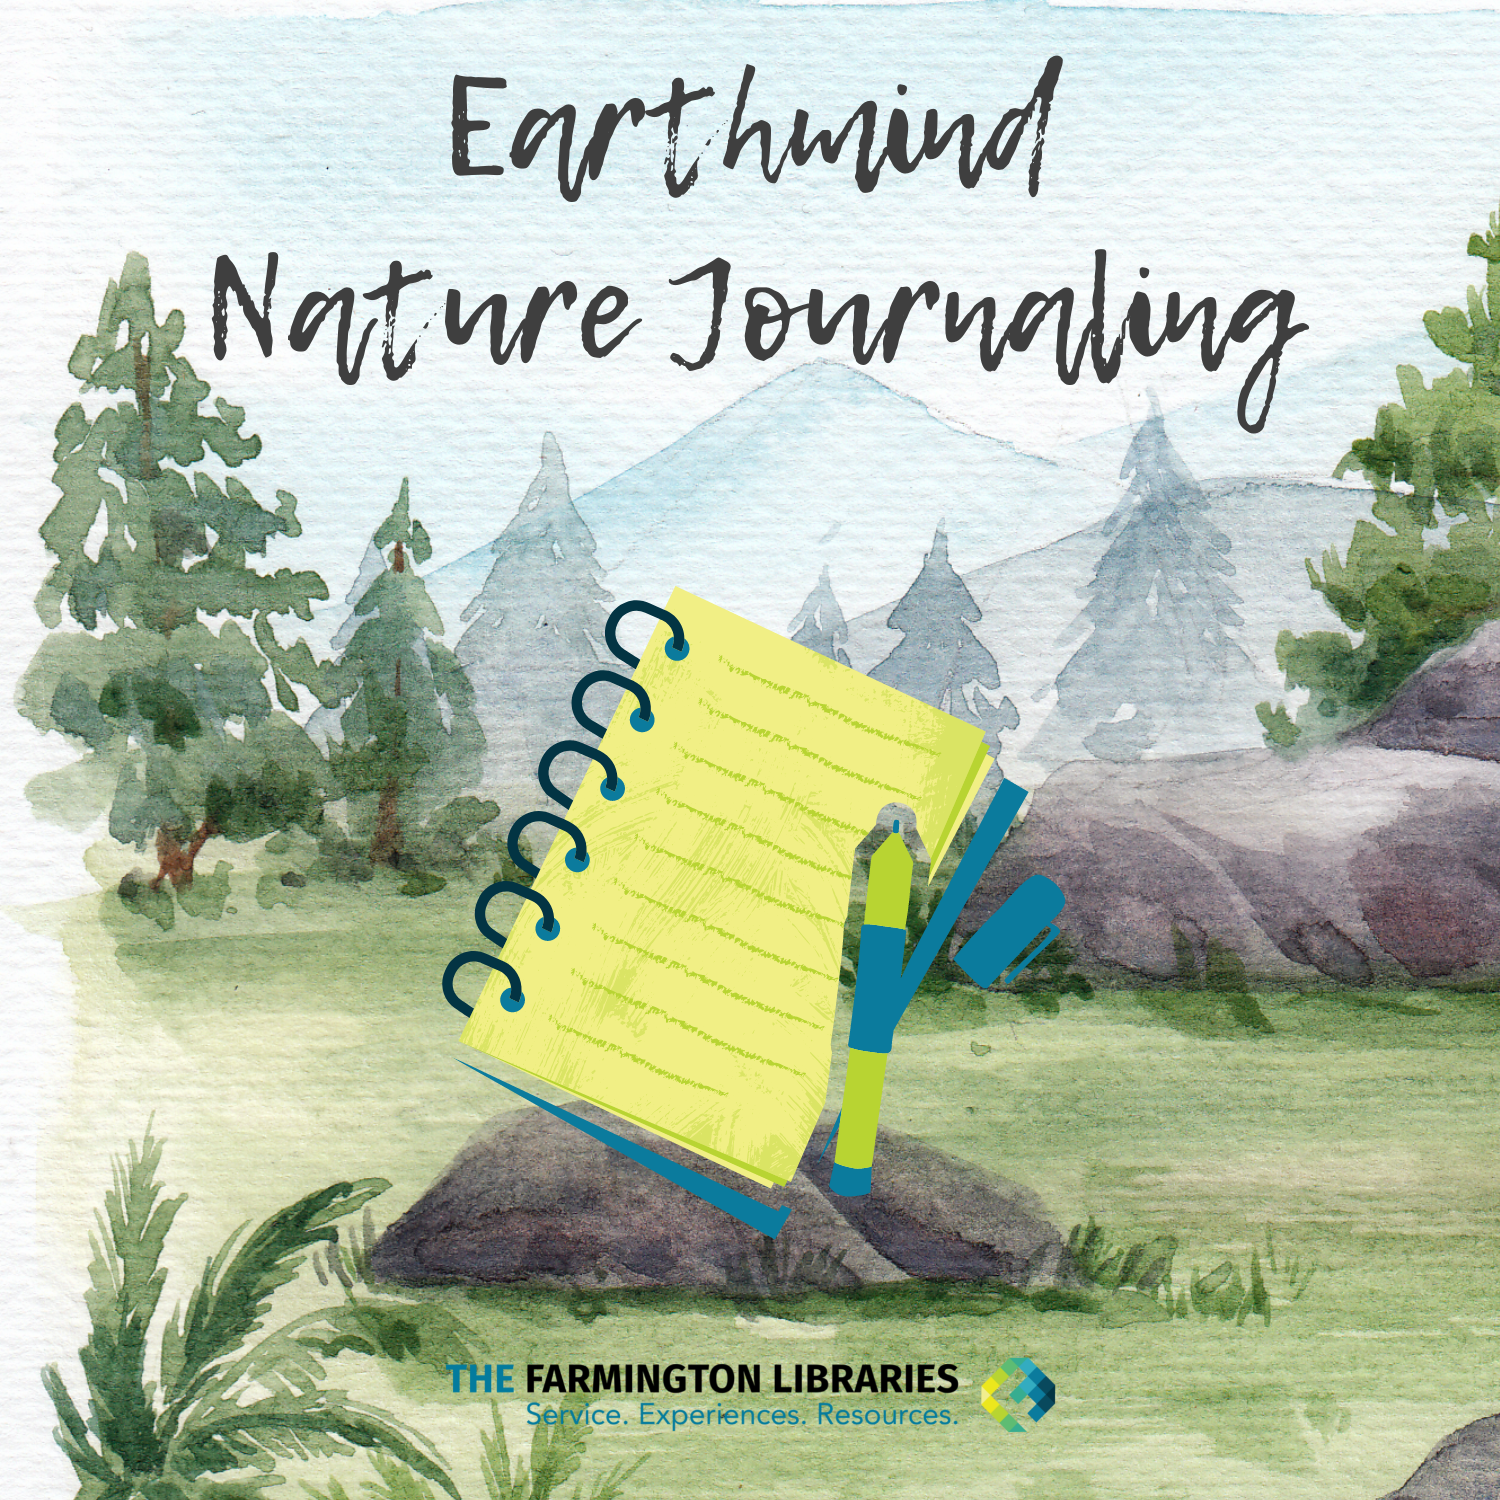 Earthmind nature journaling in scripted writing with a watercolor nature scene as the background